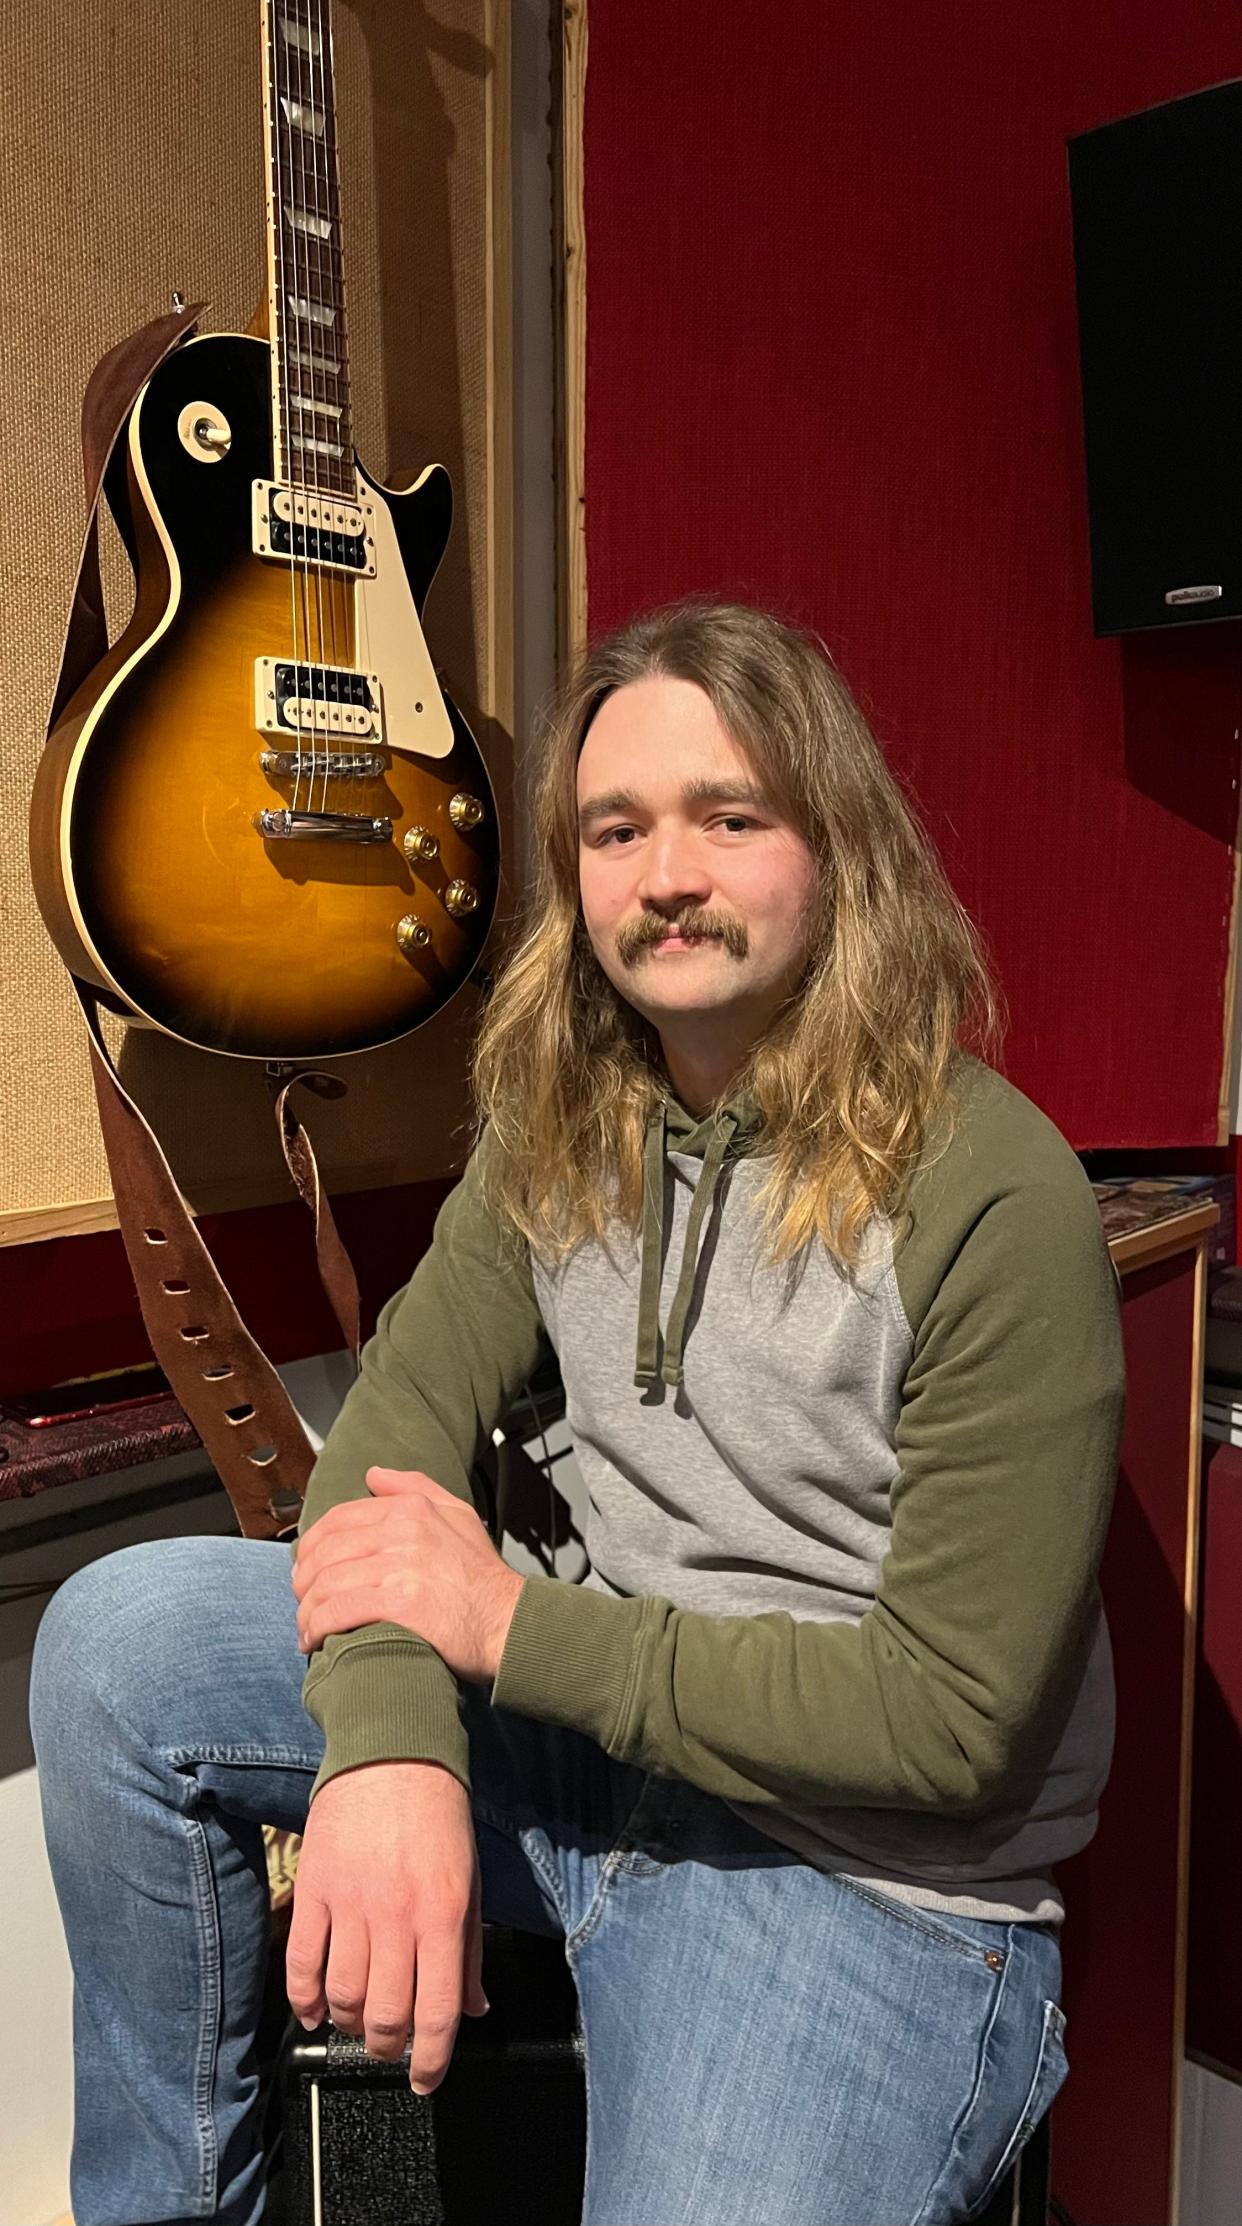 Jake Buckridge plays guitar and sings for Beach City Postal Service, a Stark County rock band that will be performing on March 16 in a Neil Young tribute concert at The Auricle in downtown Canton.